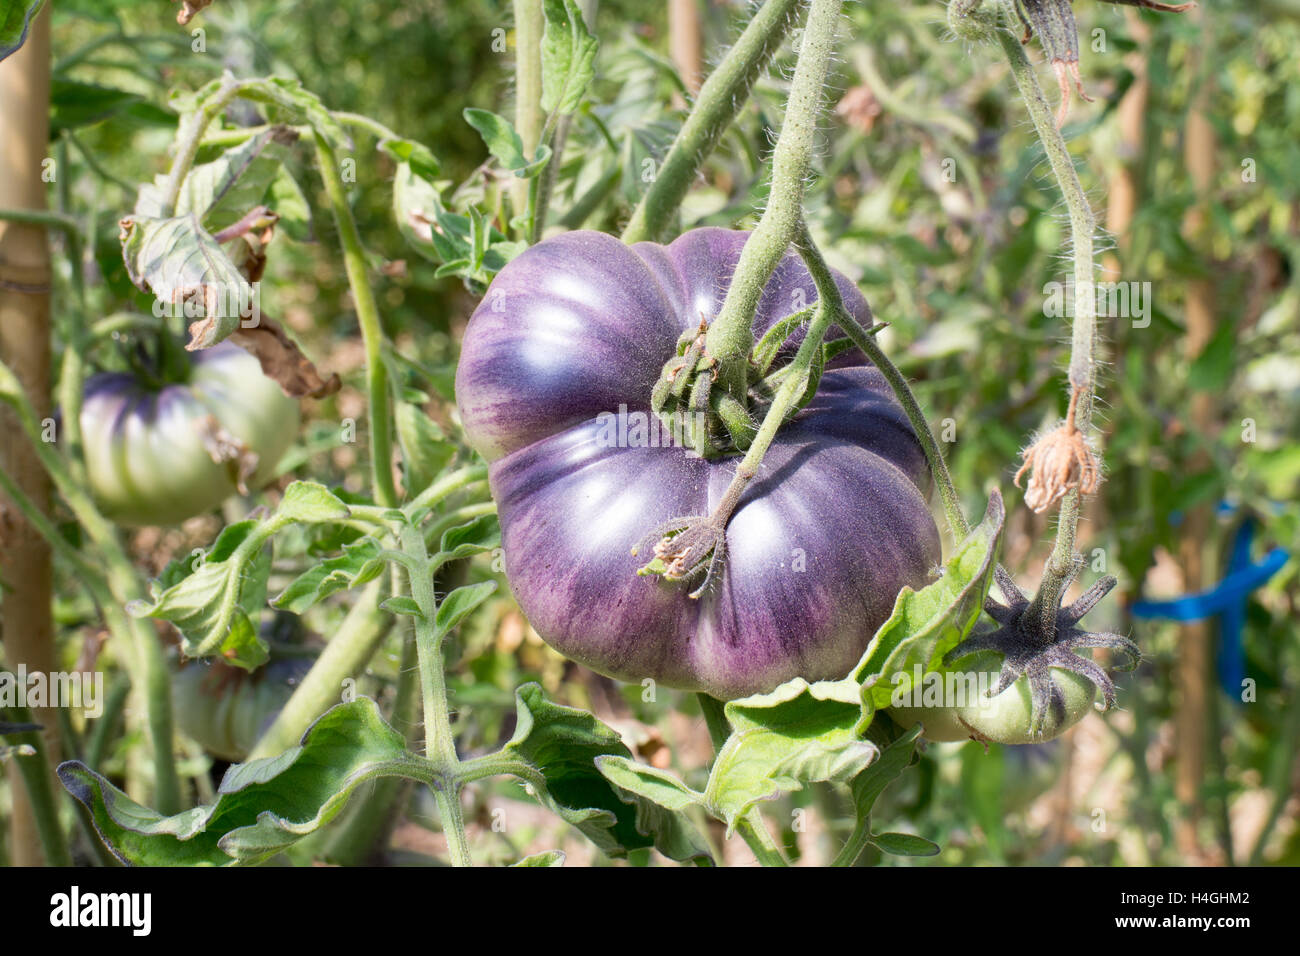 Heirloom large purple tomato on Vancouver Island in a greenhouse, farm inspired Stock Photo